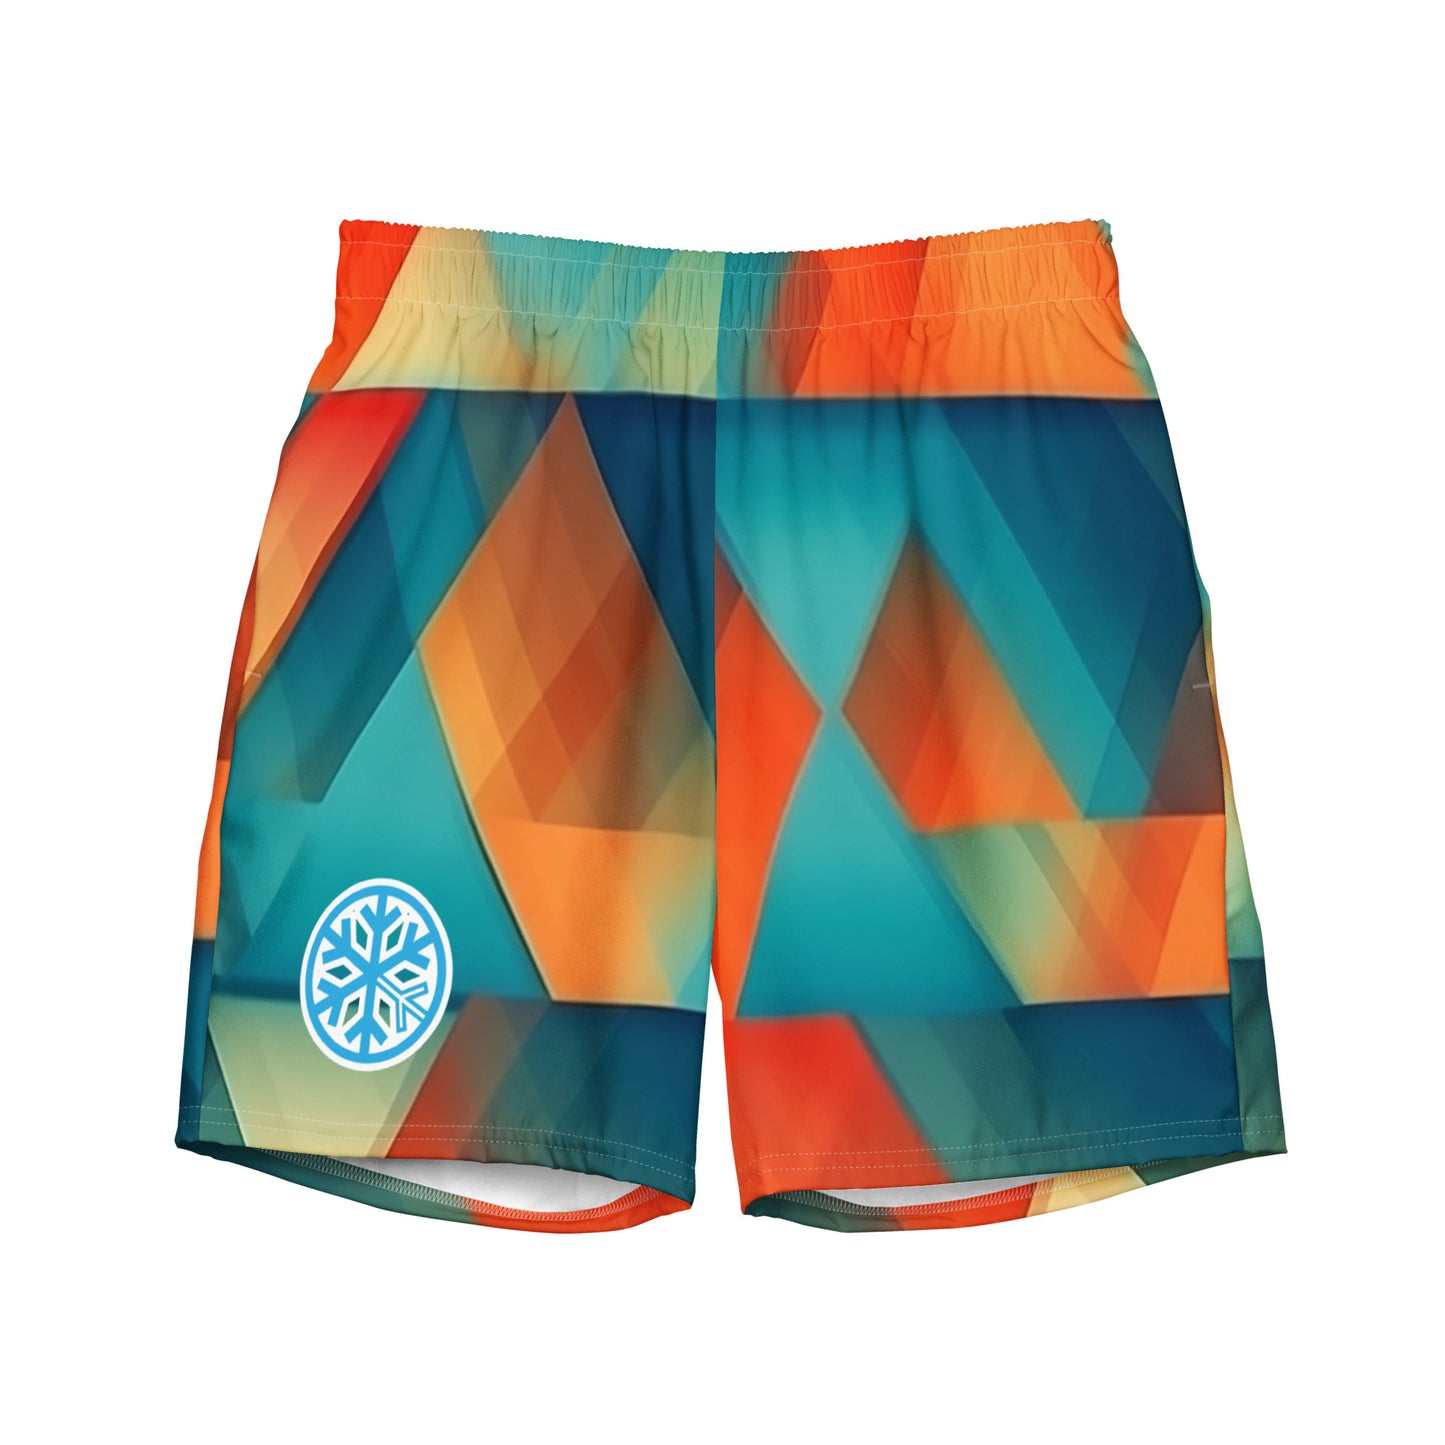 prism swim shorts by B.Different Clothing independent streetwear inspired by street art graffiti